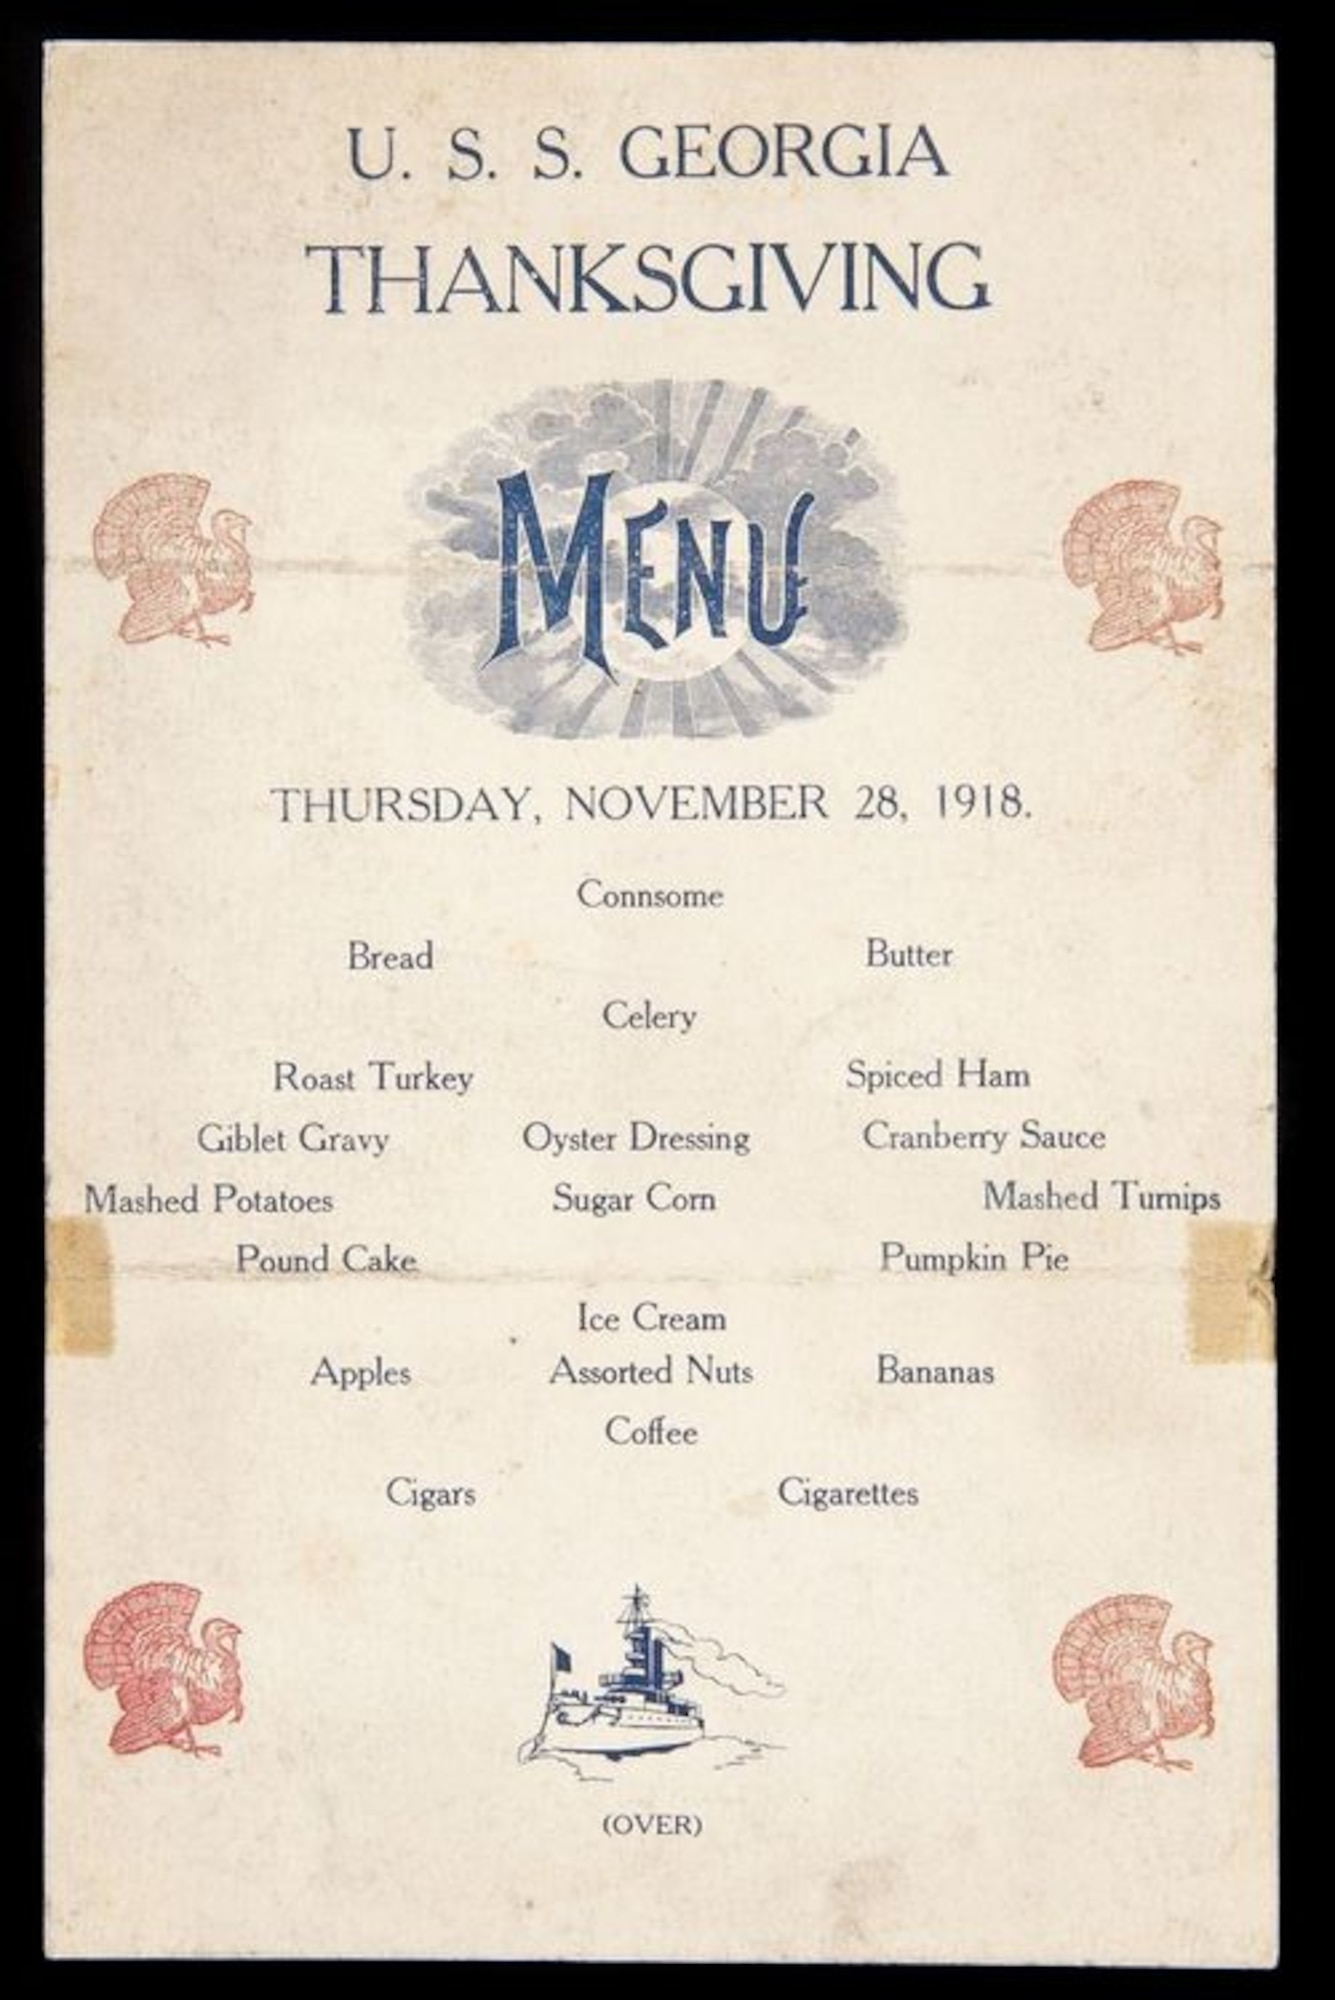 Brown menu with Turkeys printed on it, and food items such as mashed potatoes, roast turkey, giblet gravy, and cigars and cigarettes, and dated Thursday, November 28, 1918.